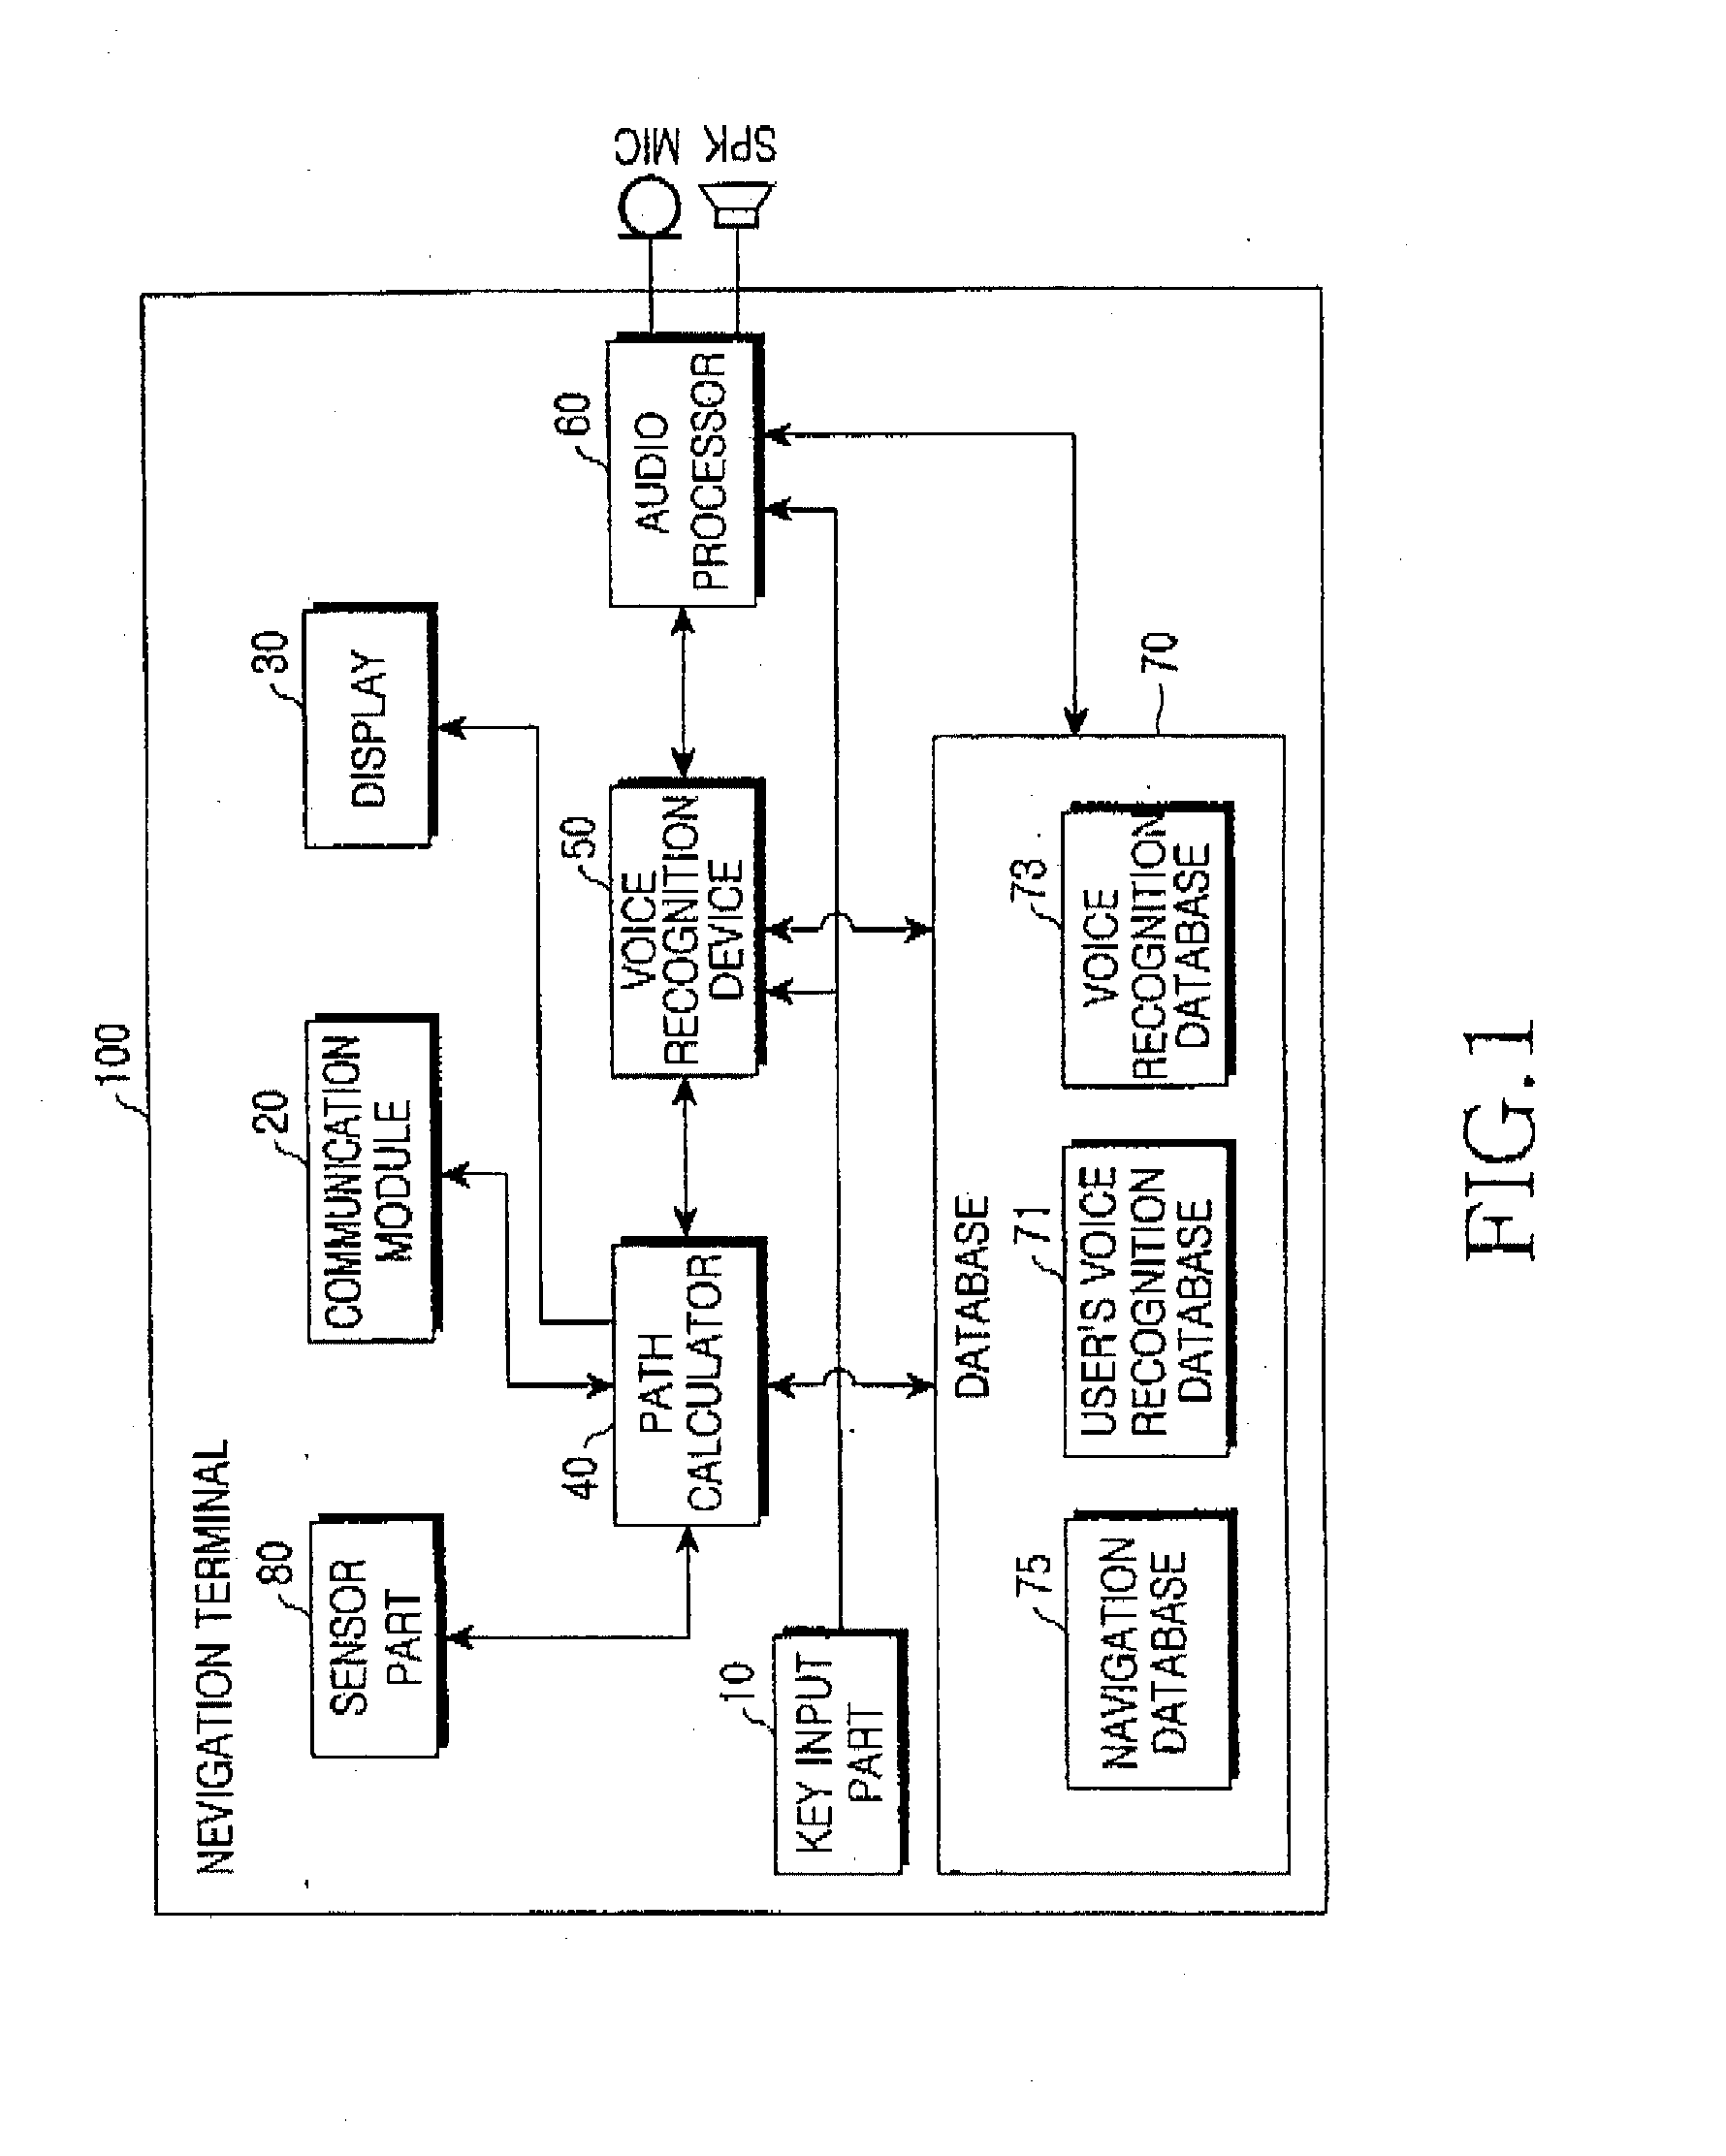 Method of setting a navigation terminal for a destination and an apparatus therefor